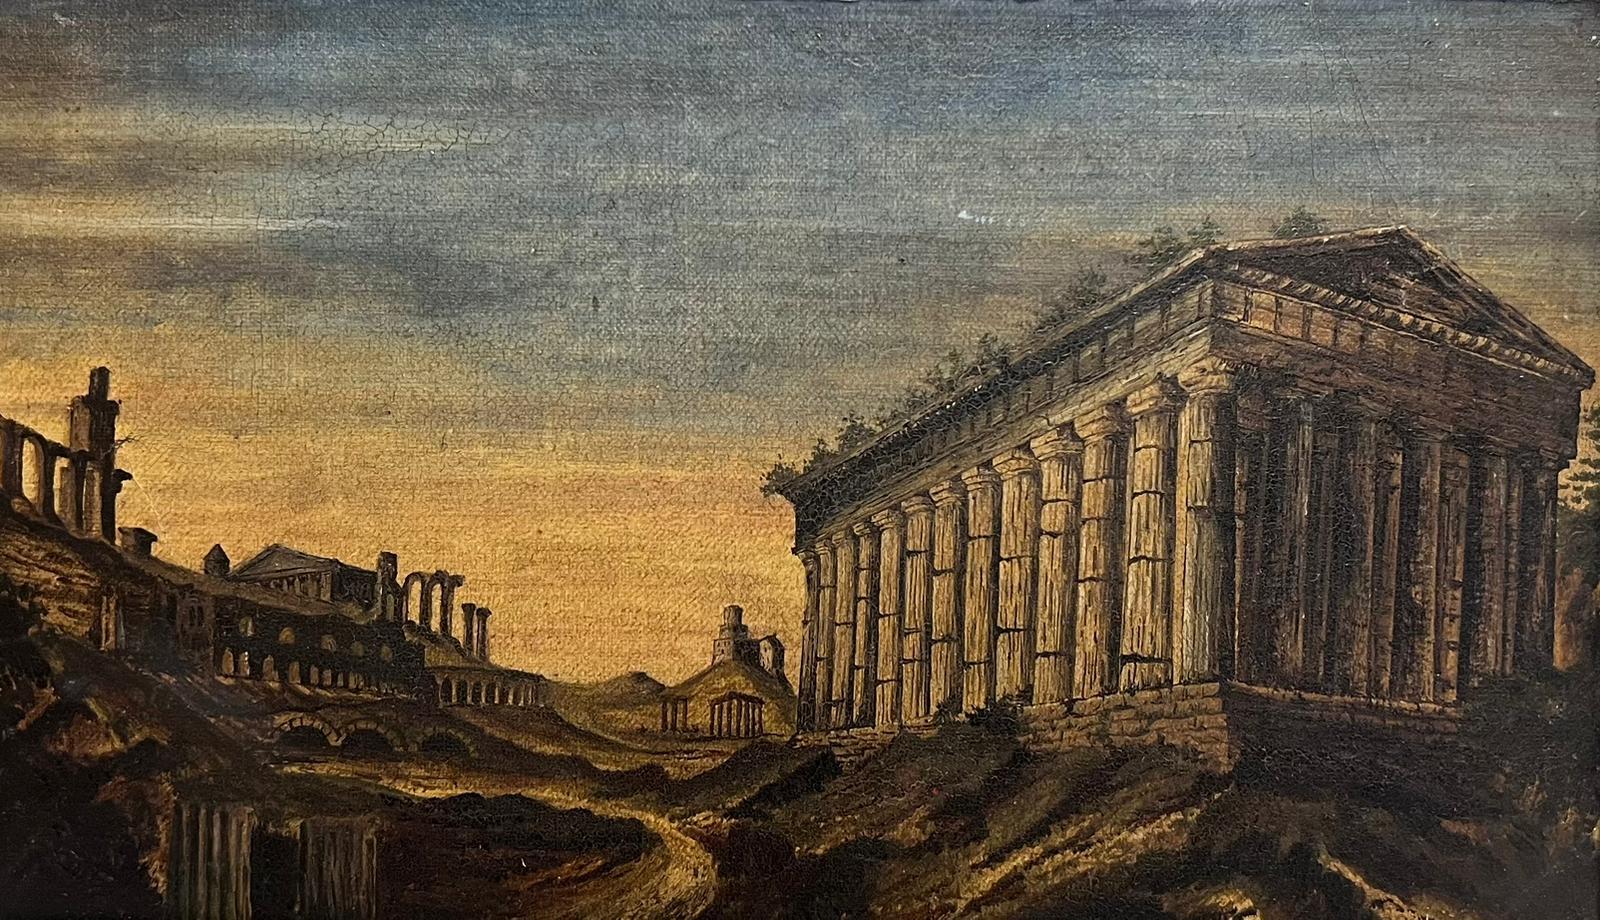 Theseus Temple, Athens
early 1800's Italian artist
oil on canvas laid over board, framed
framed: 9 x 12.75 inches
board: 6.75 x 10.75 inches
provenance: private collection, UK
condition: a few scuffs and marks to the surface but overall good and